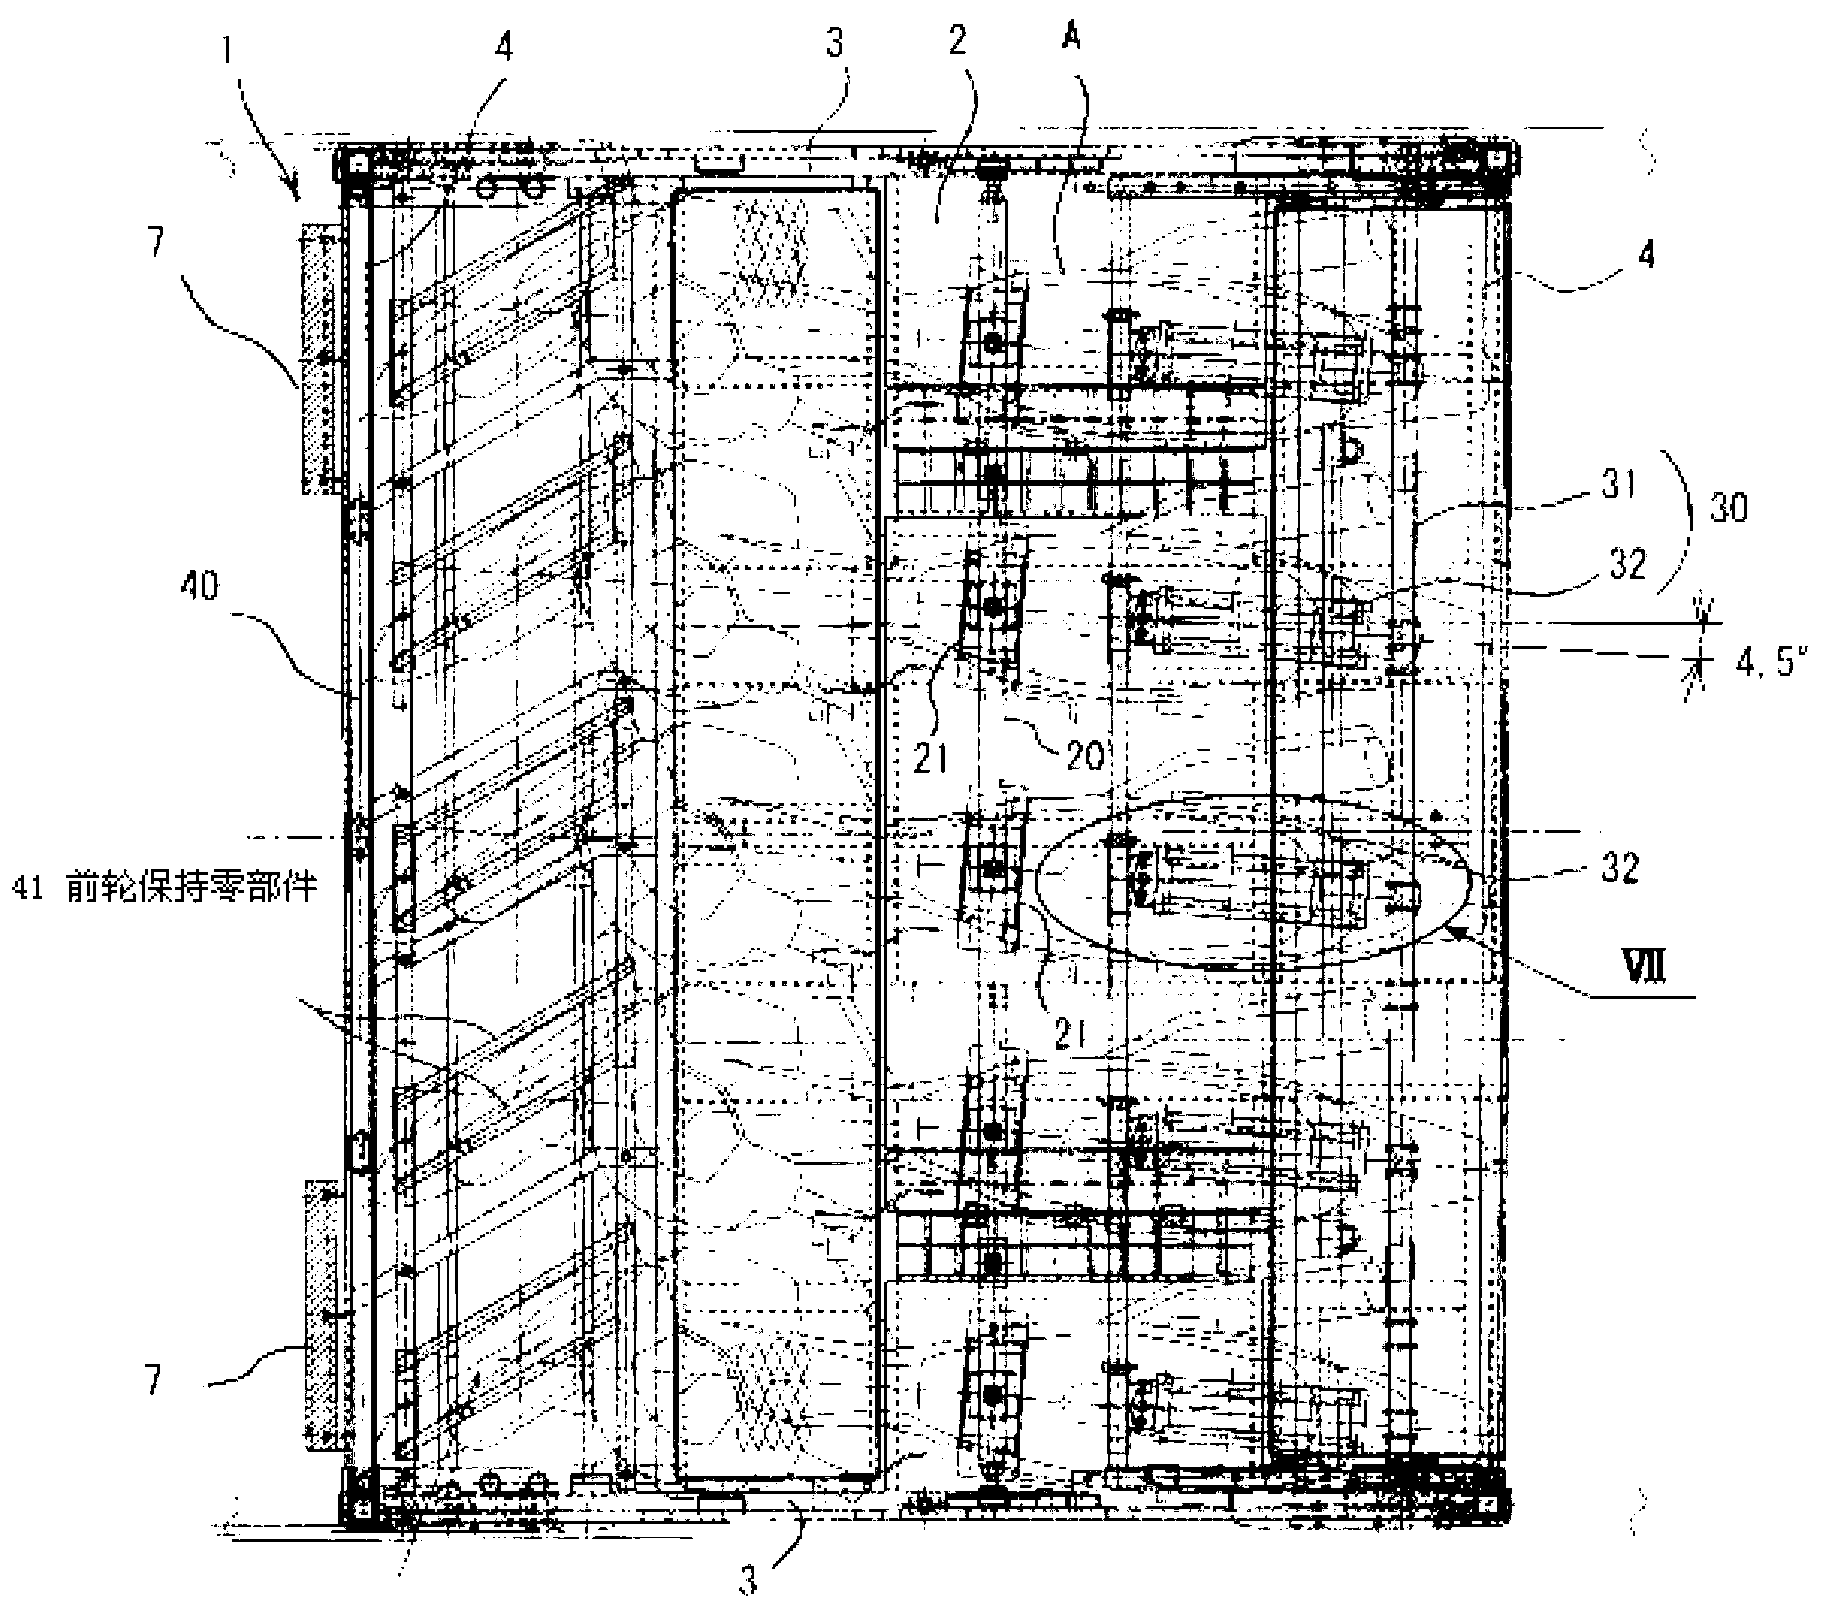 Securing device for transporting two-wheeled vehicle